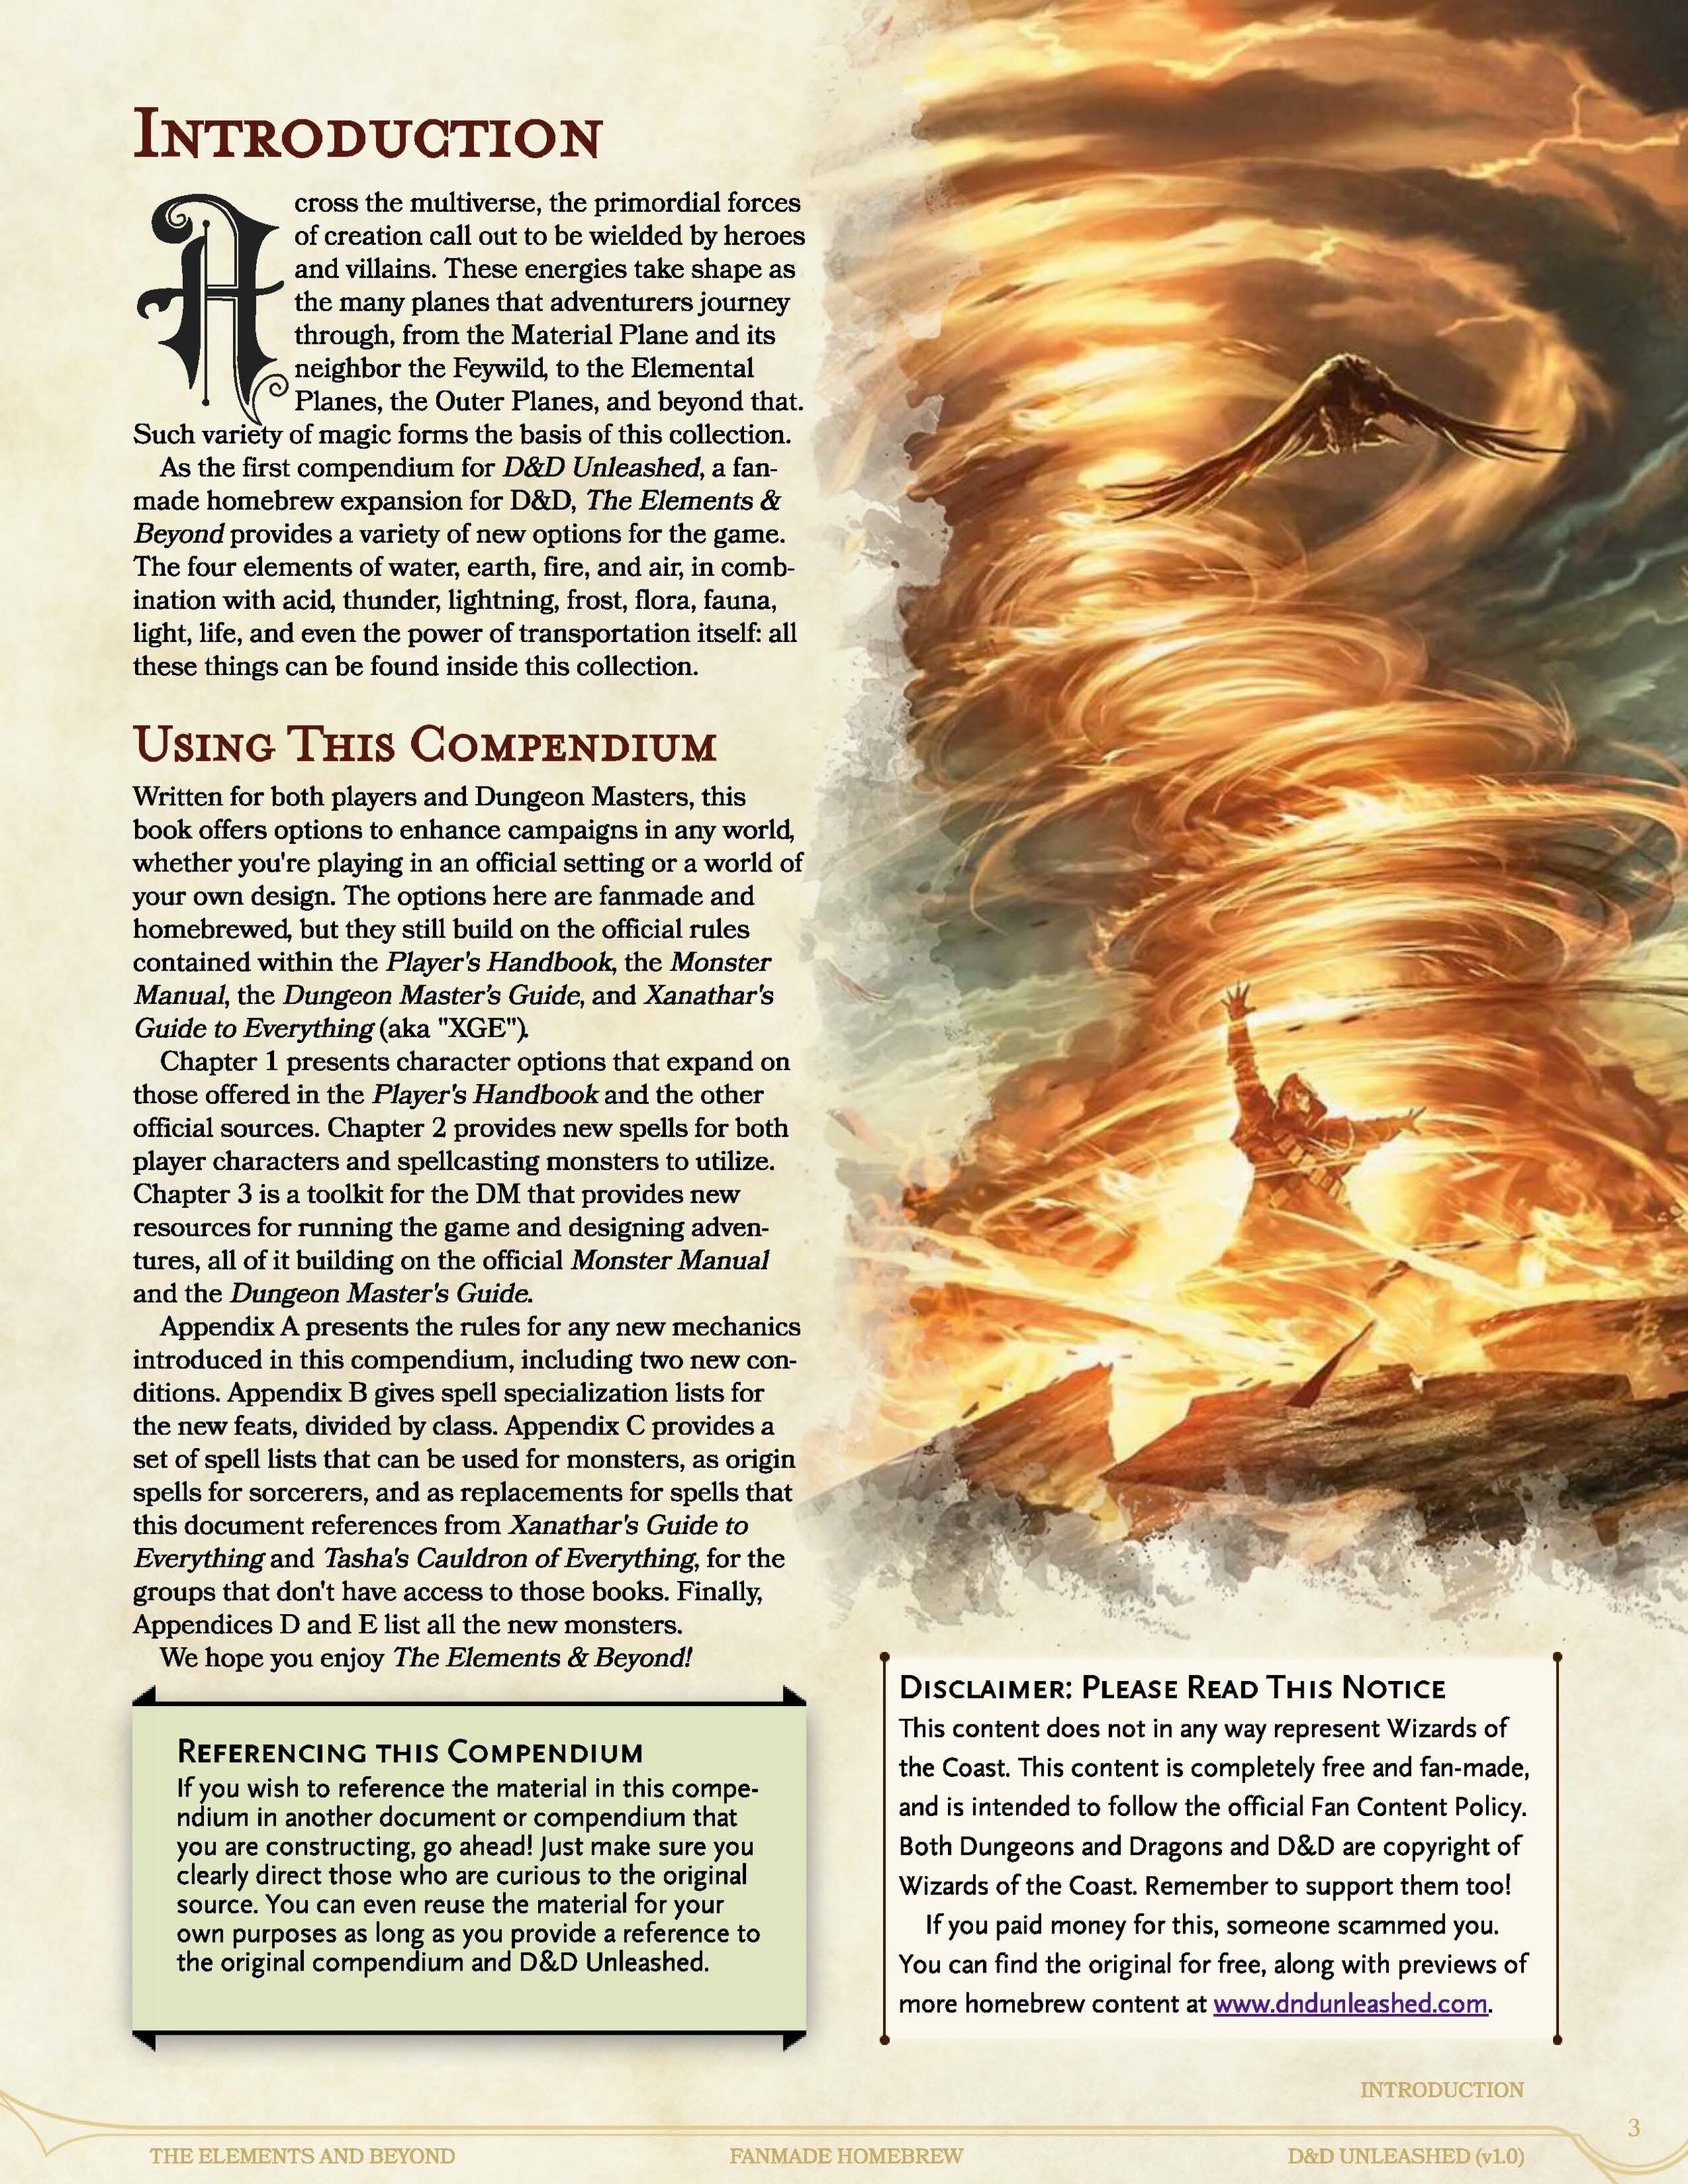 D&D Unleashed Compendium -- The Elements and Beyond (v1p0)_Page_003.jpg